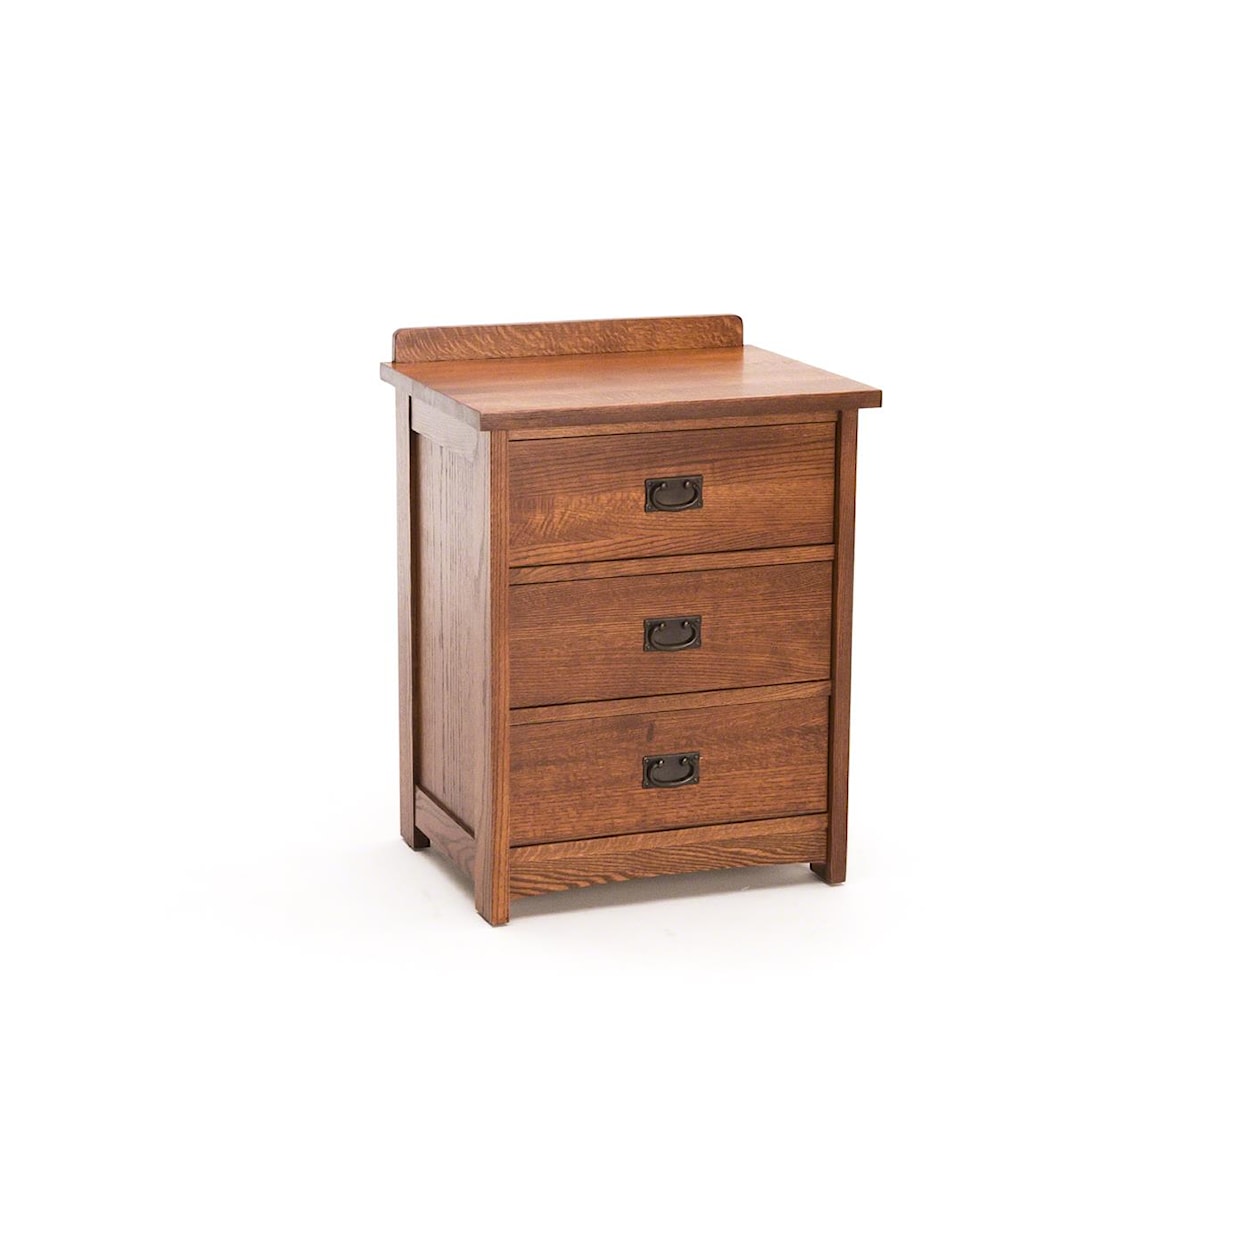 Witmer Furniture American Mission 3-Drawer Nightstand